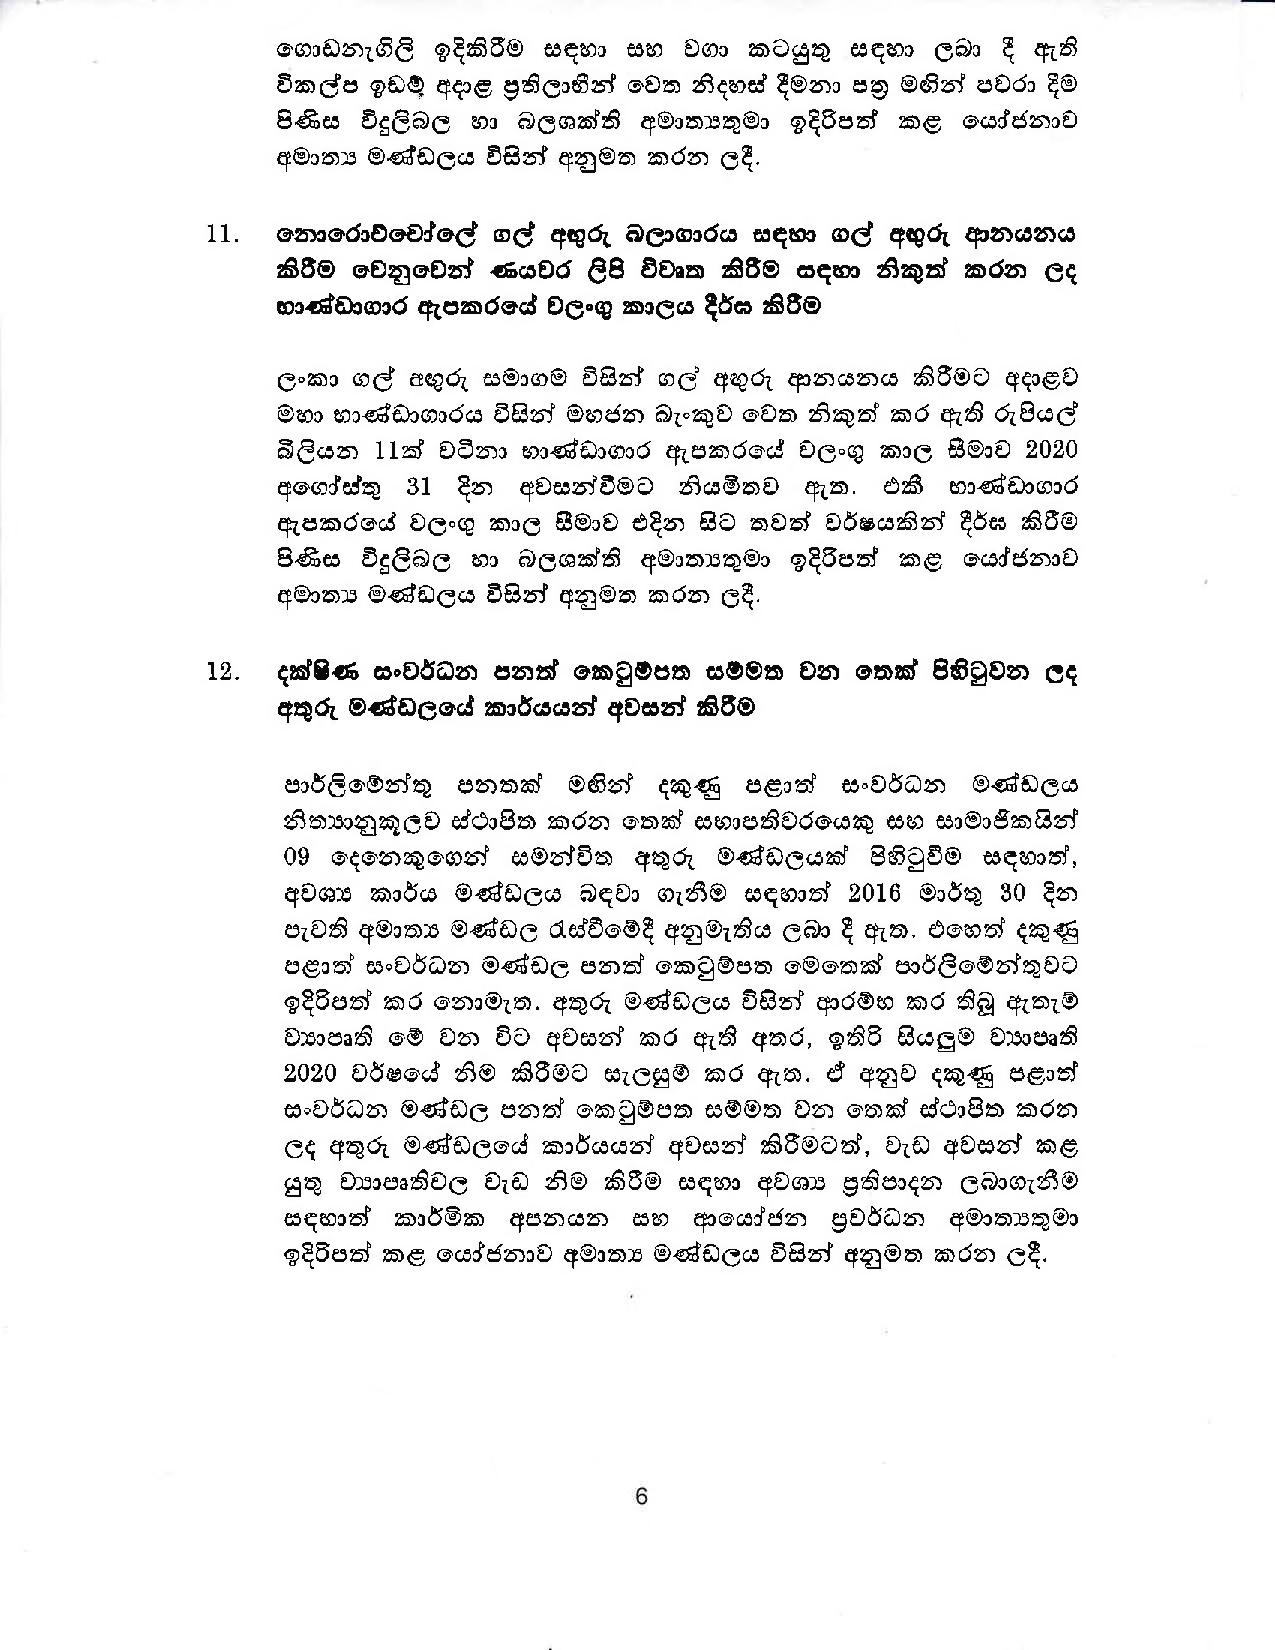 Cabinet Decision on 22.07.2020 page 006